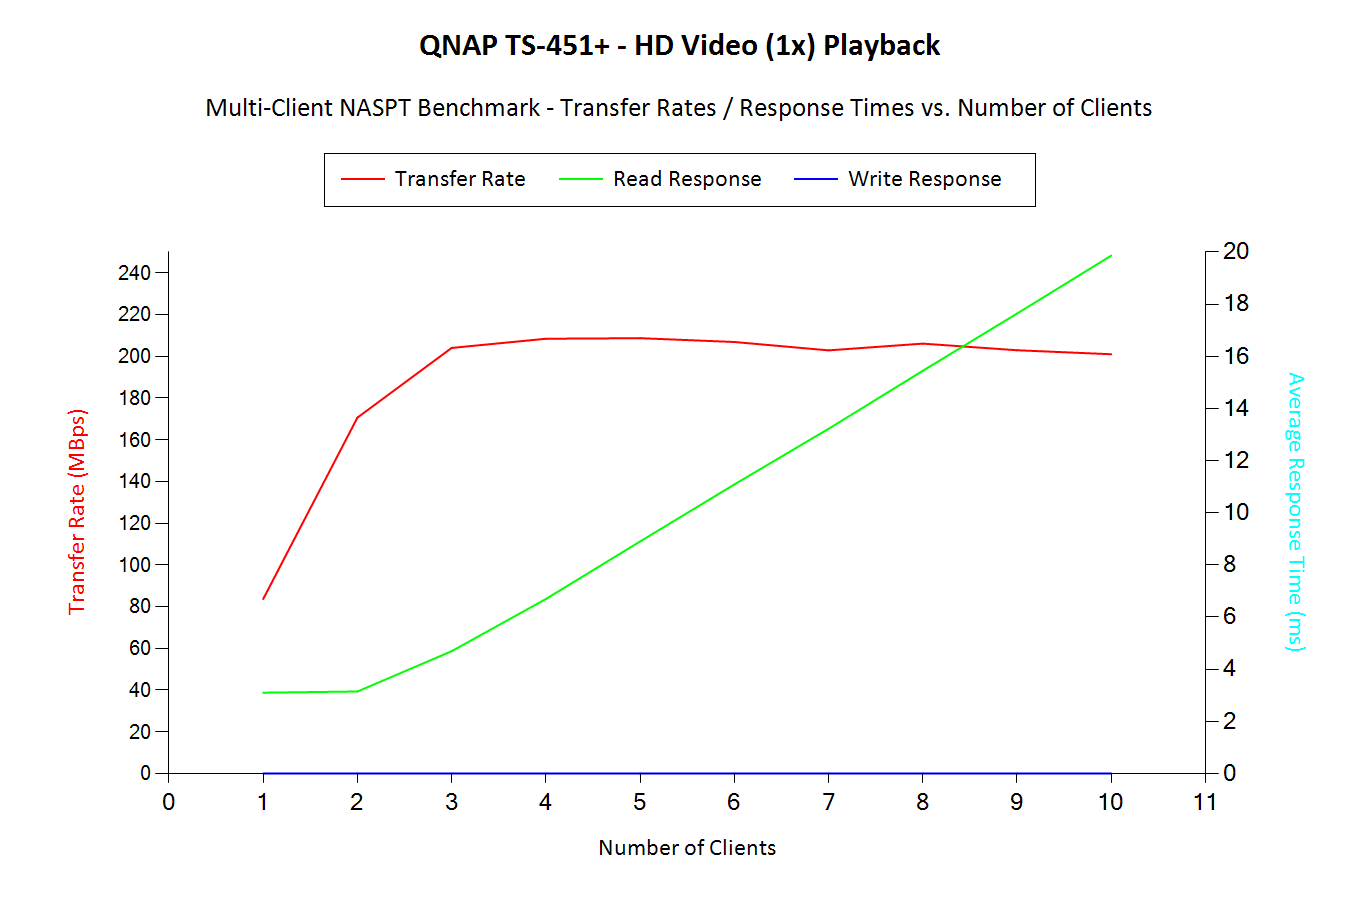 HD Video (1x) Playback - Multi-Client Benchmark